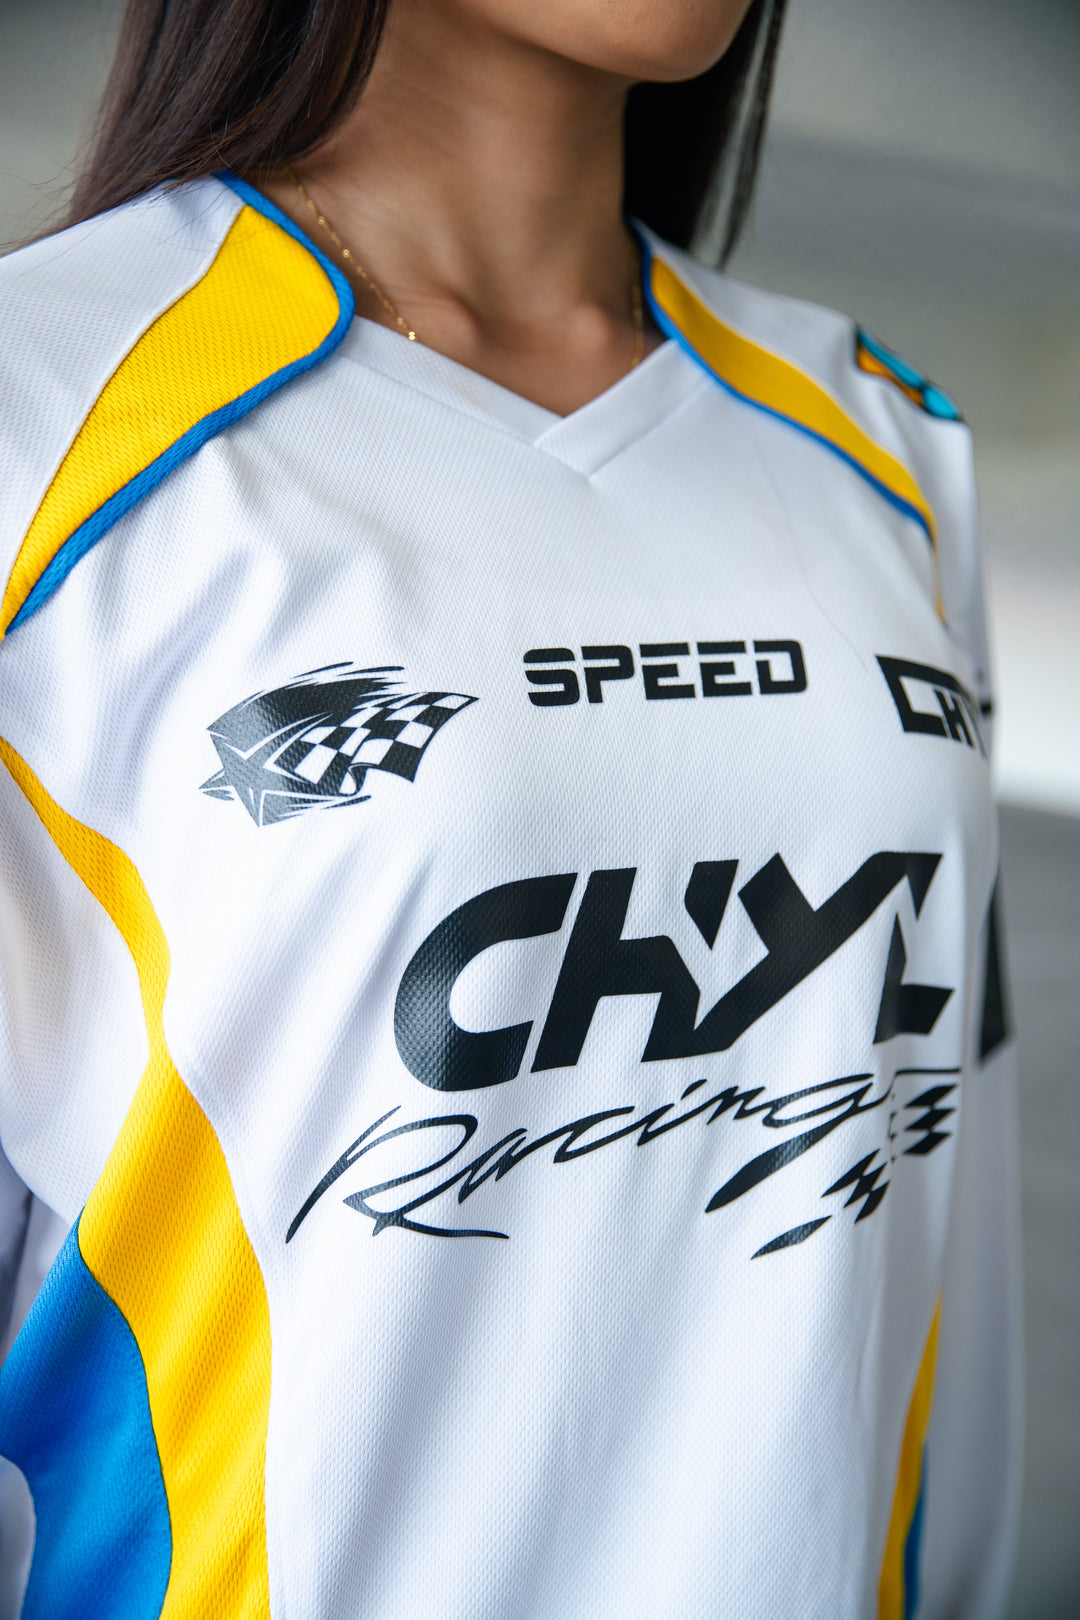 CHYL White Racing Jersey Female Model Frontside Closeup Detail